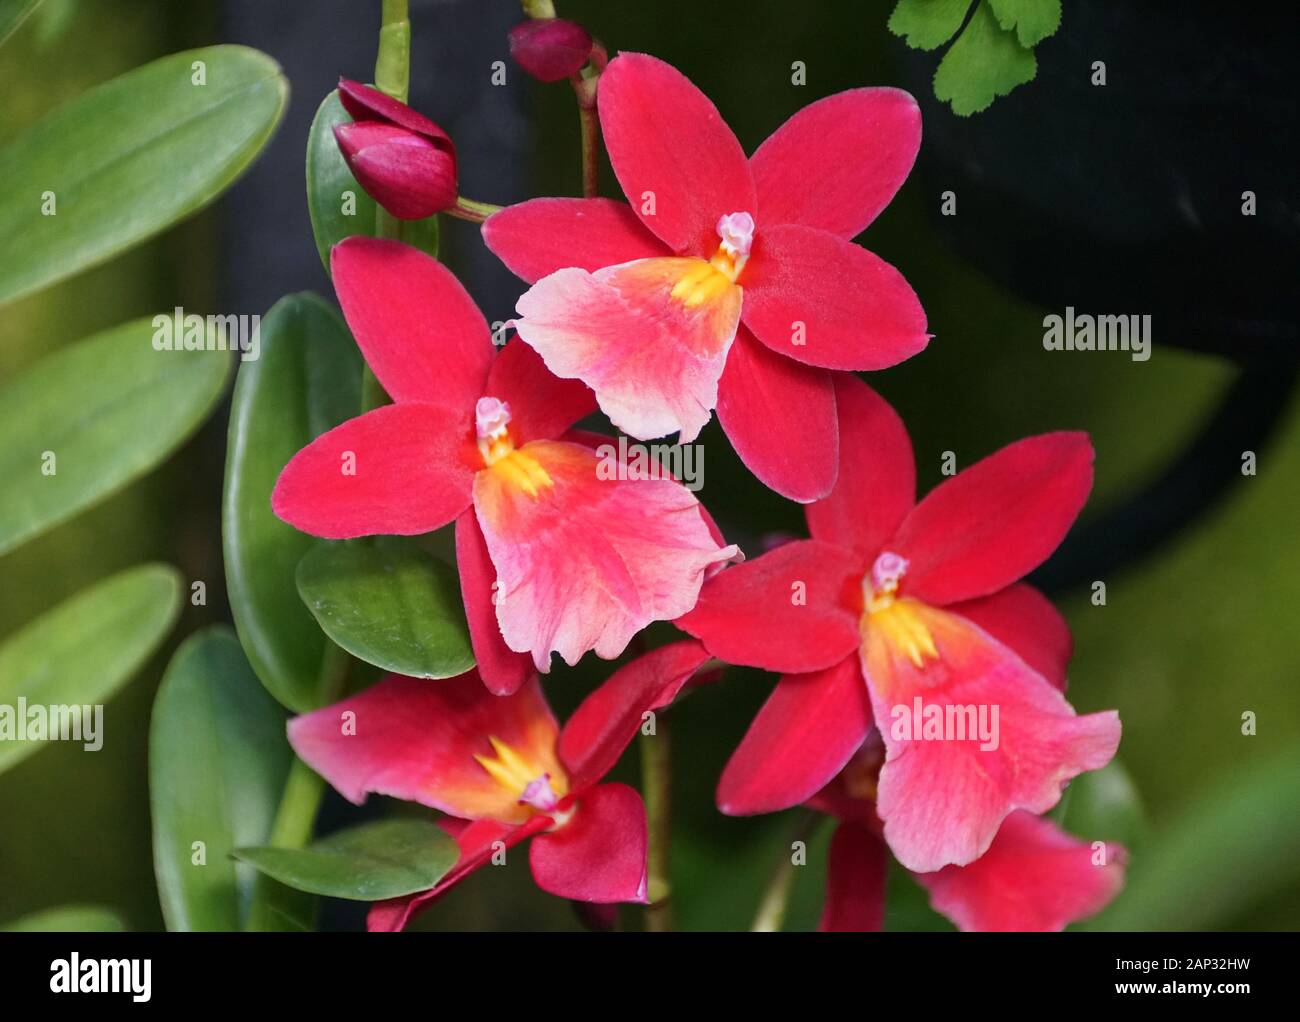 Red and pink color of Intergeneric Oncidium hybrid orchids Stock Photo